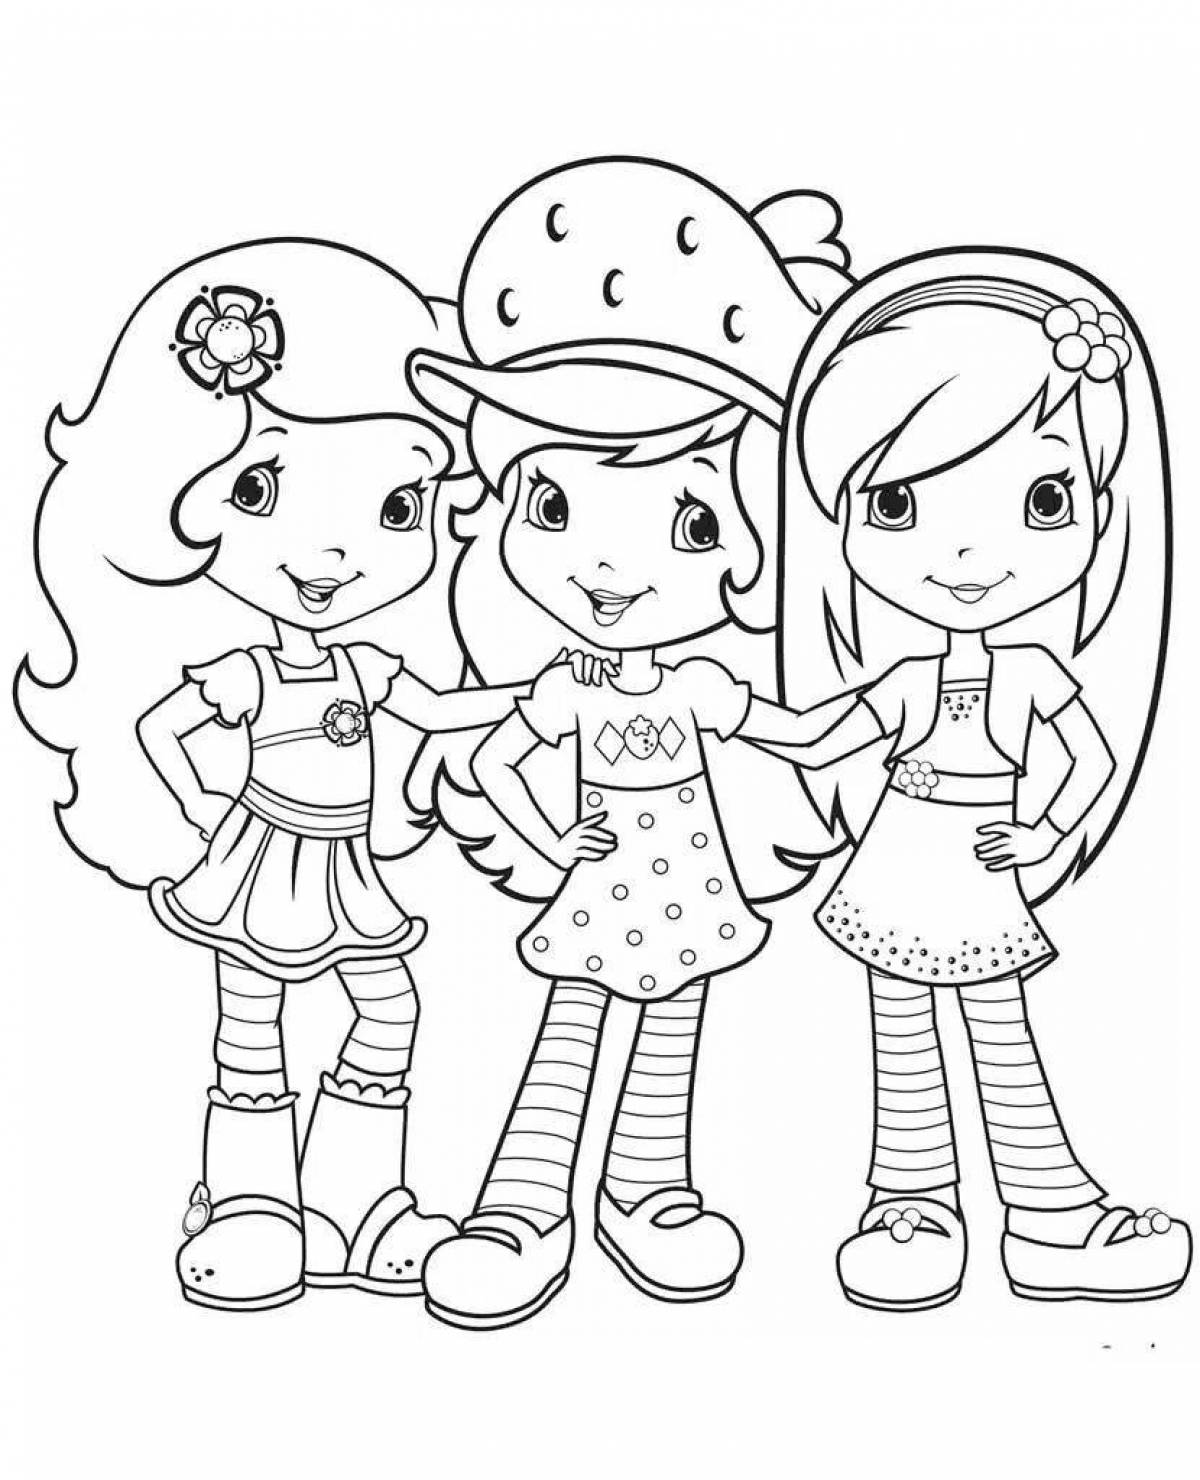 Pretty charlotte strawberry coloring page for girls